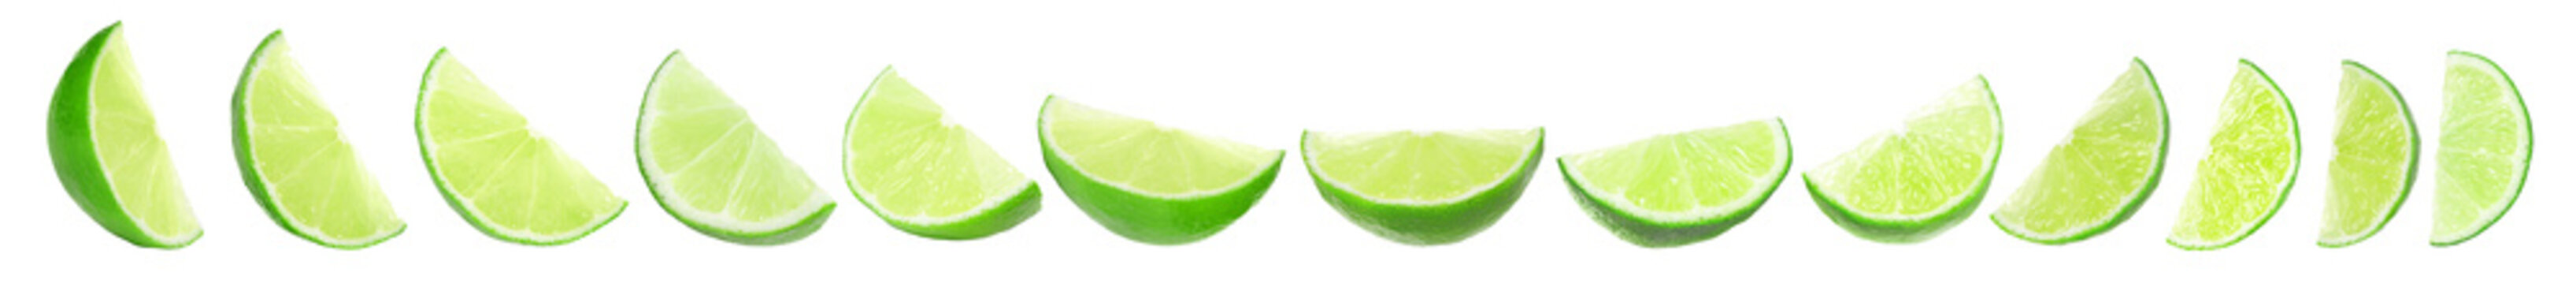 Set of juicy ripe limes on white background. Banner design